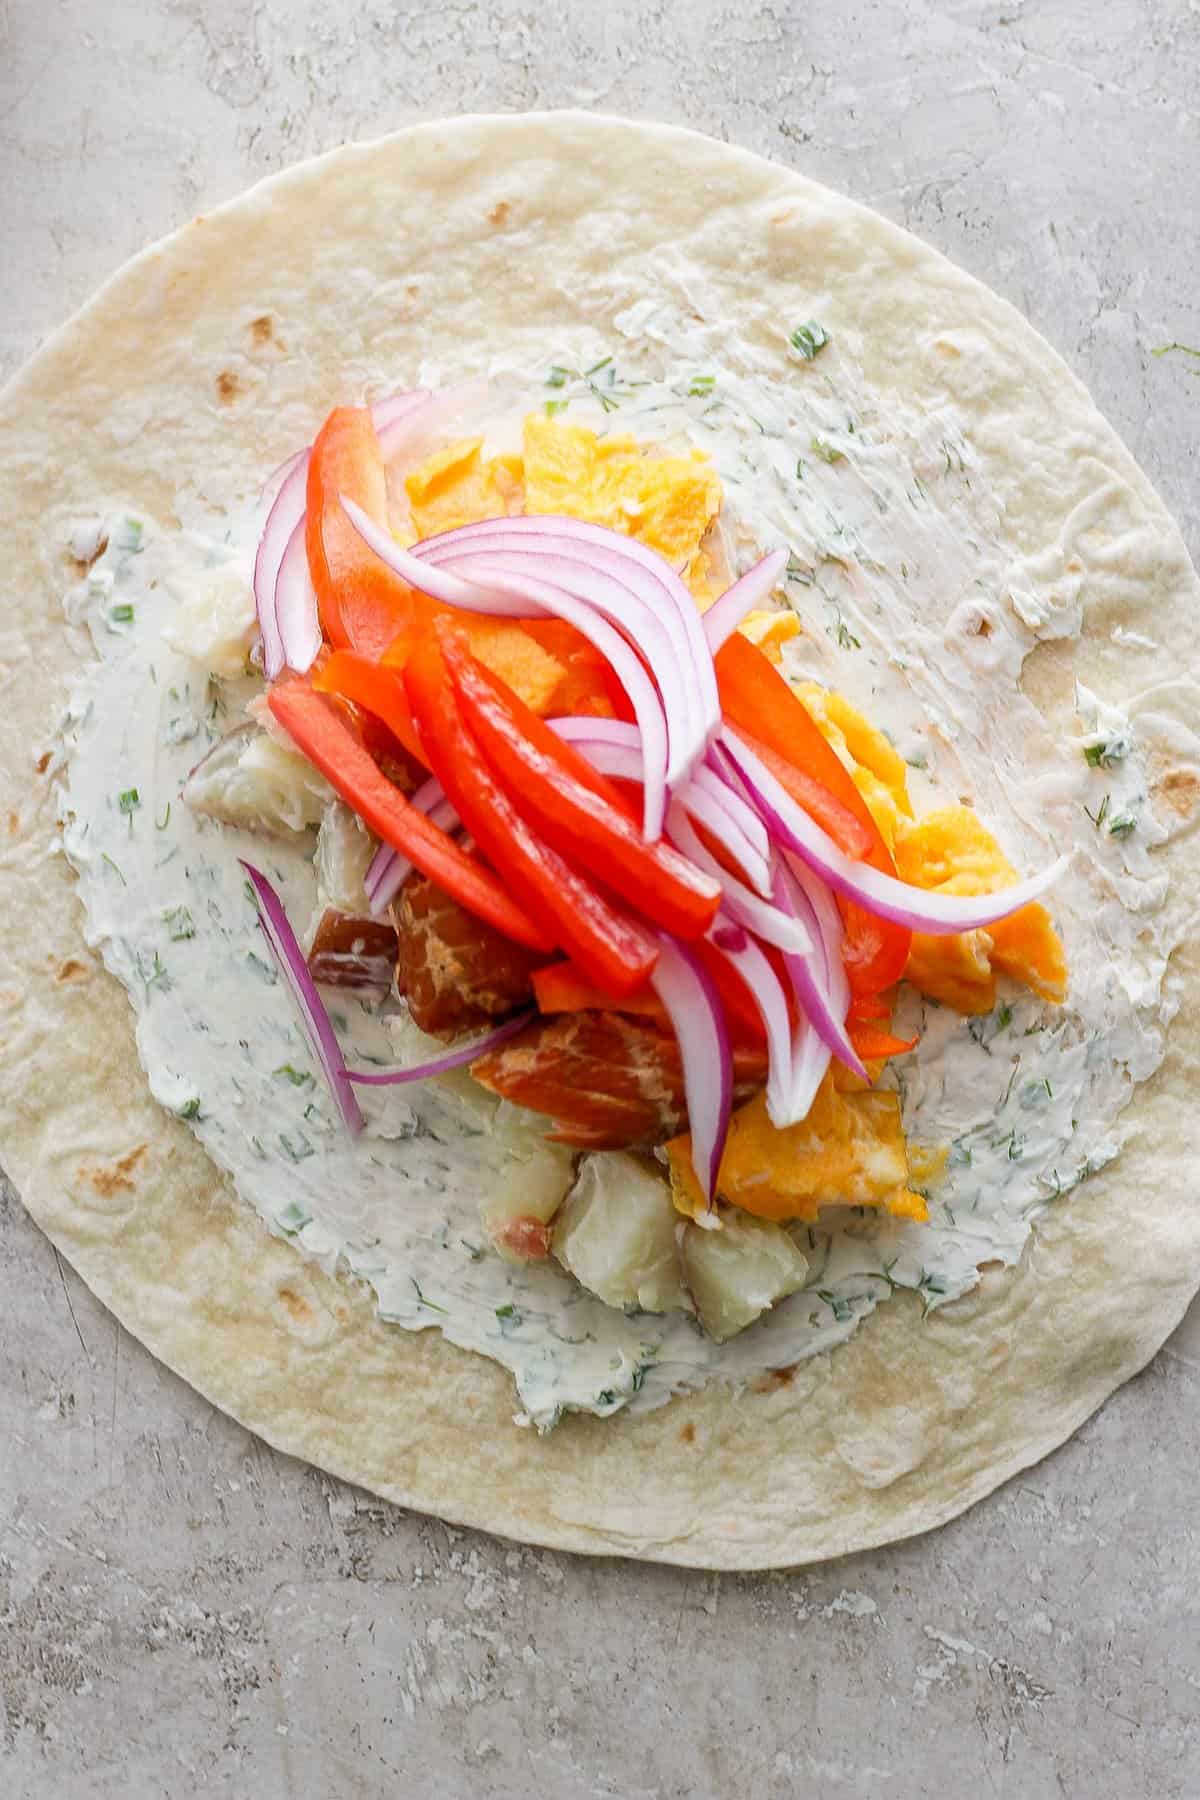 A flour tortilla spread with herb cream cheese topped with slices of red bell pepper, red onion, and c،ks of chicken and orange.